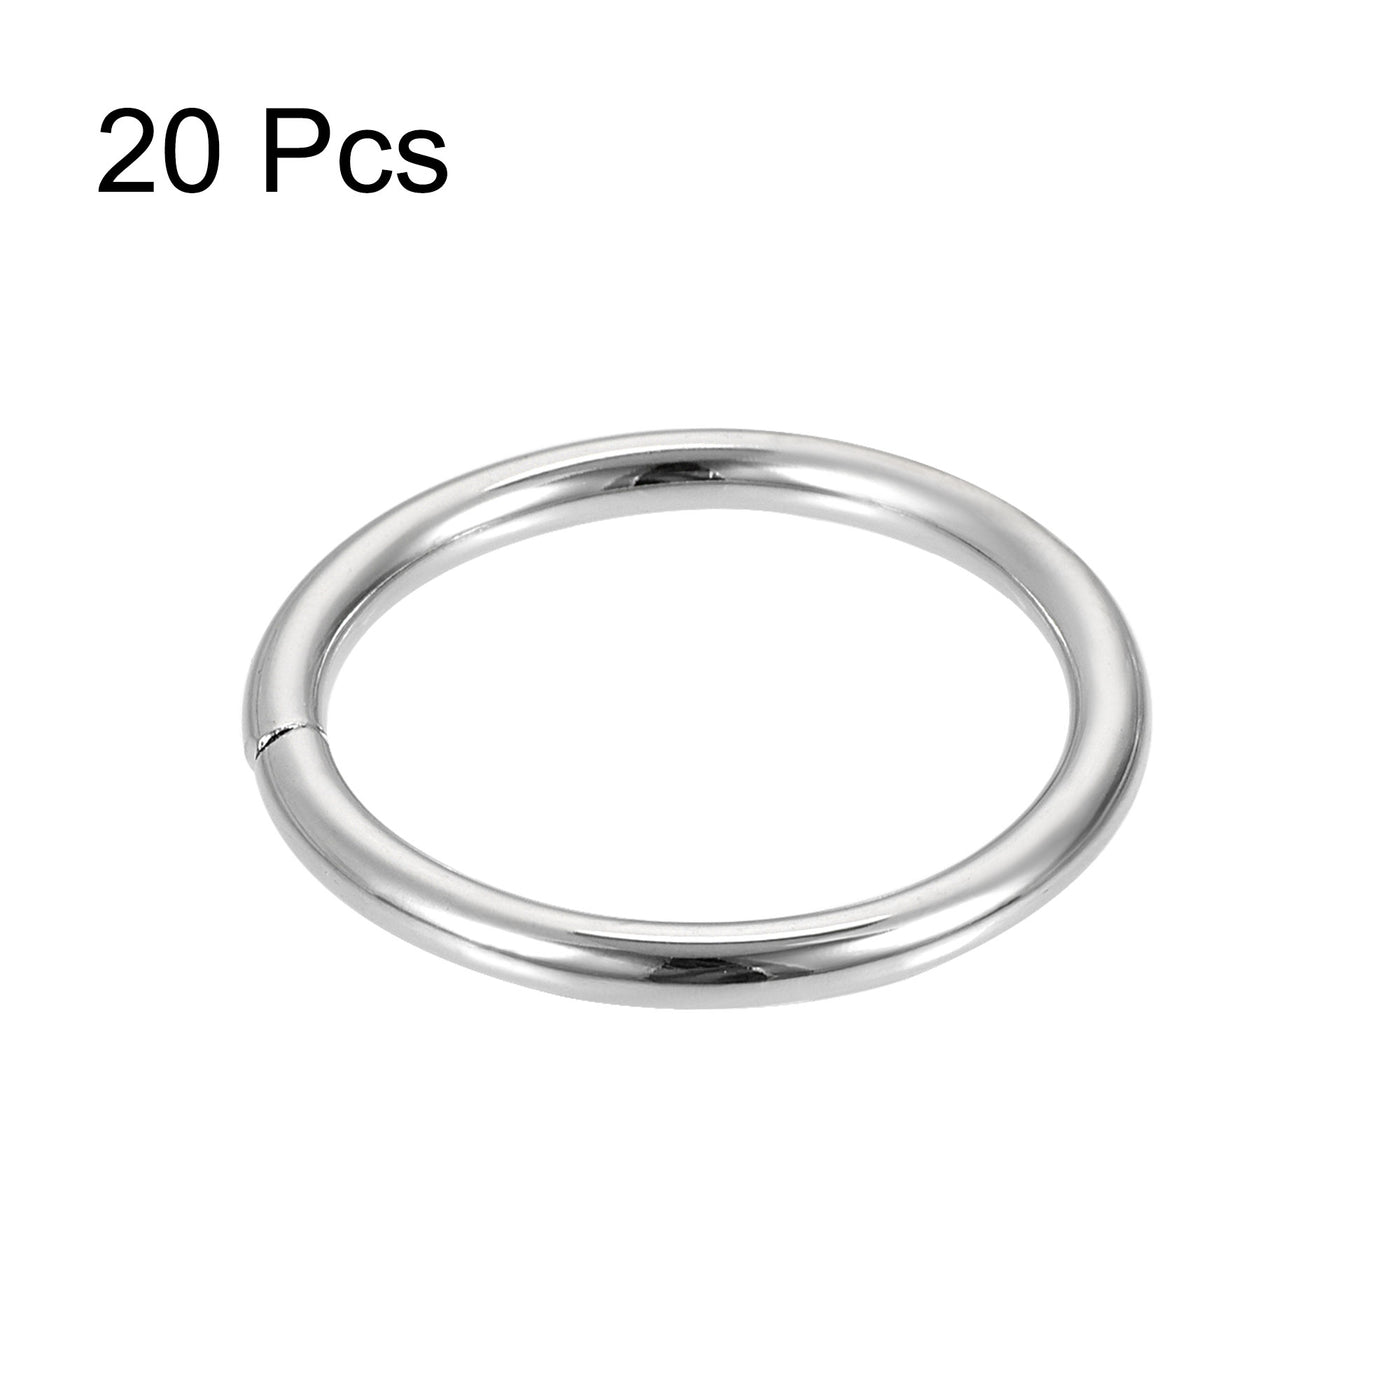 uxcell Uxcell Metal O Ring 32mm(1.26") ID 3.8mm Thickness Non-Welded Rings Silver Tone 20pcs